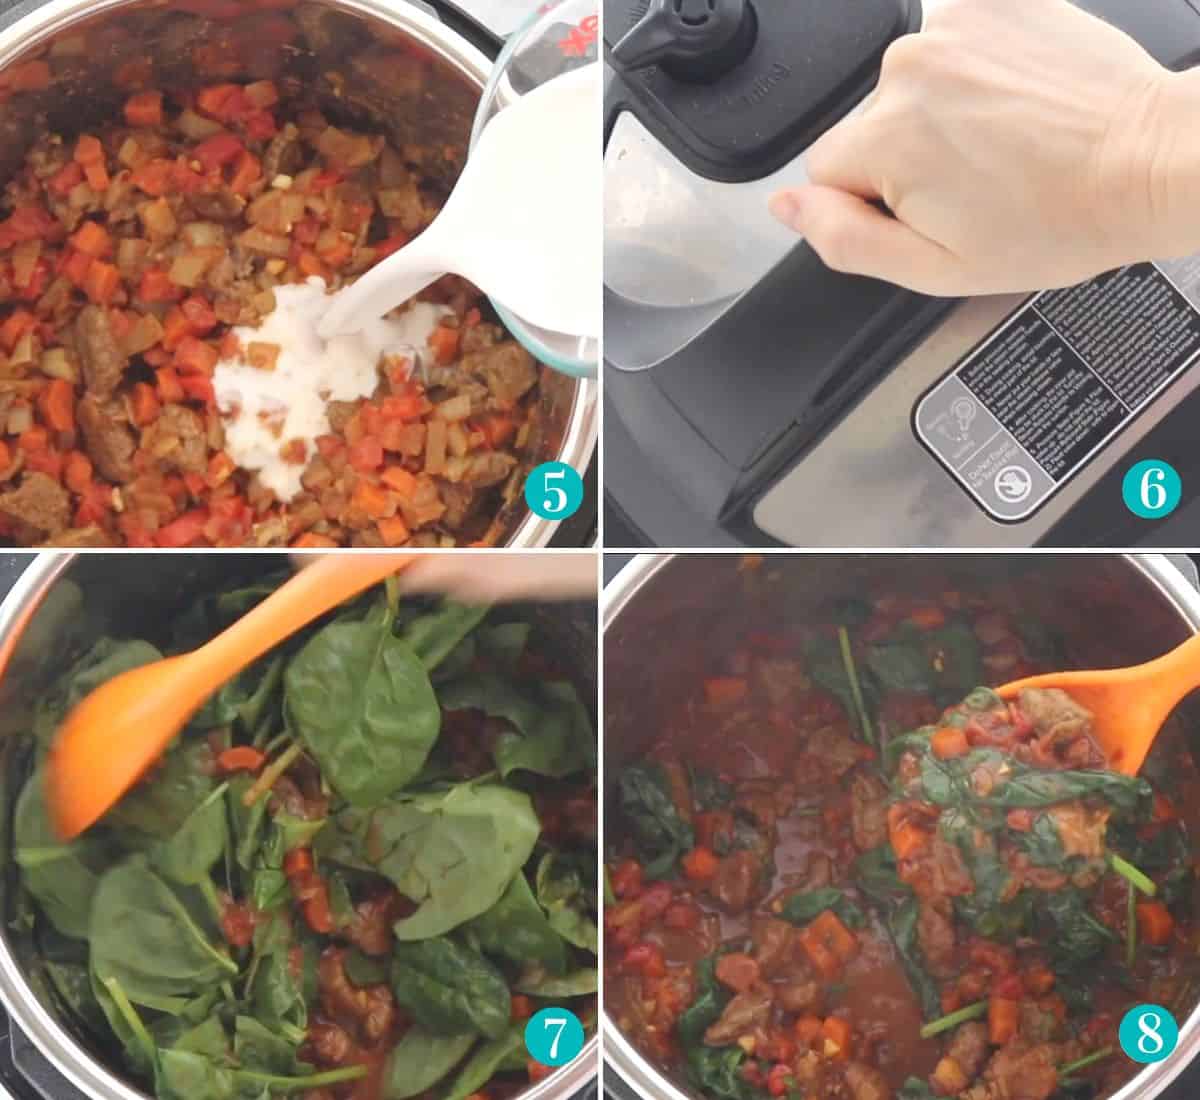 four photo collage of coconut milk pouring into an instant pot, hand putting the top of the instant pot, spinach being stirred into instant pot, and a spoon scooping lamb curry out of the instant pot.